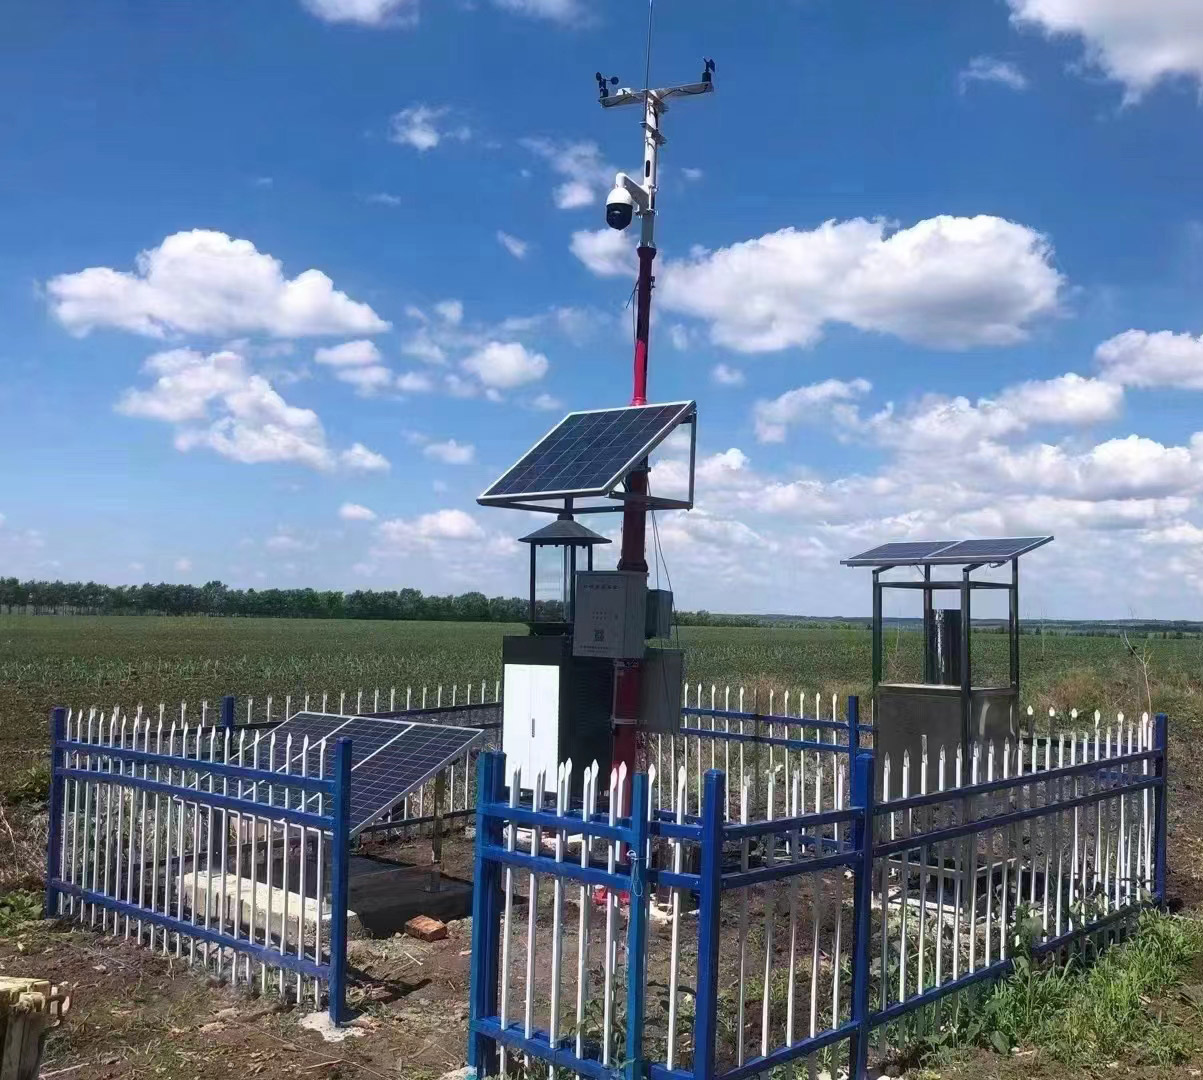 Small Portable Weather Station Improves Agrometeorological Monitoring Level